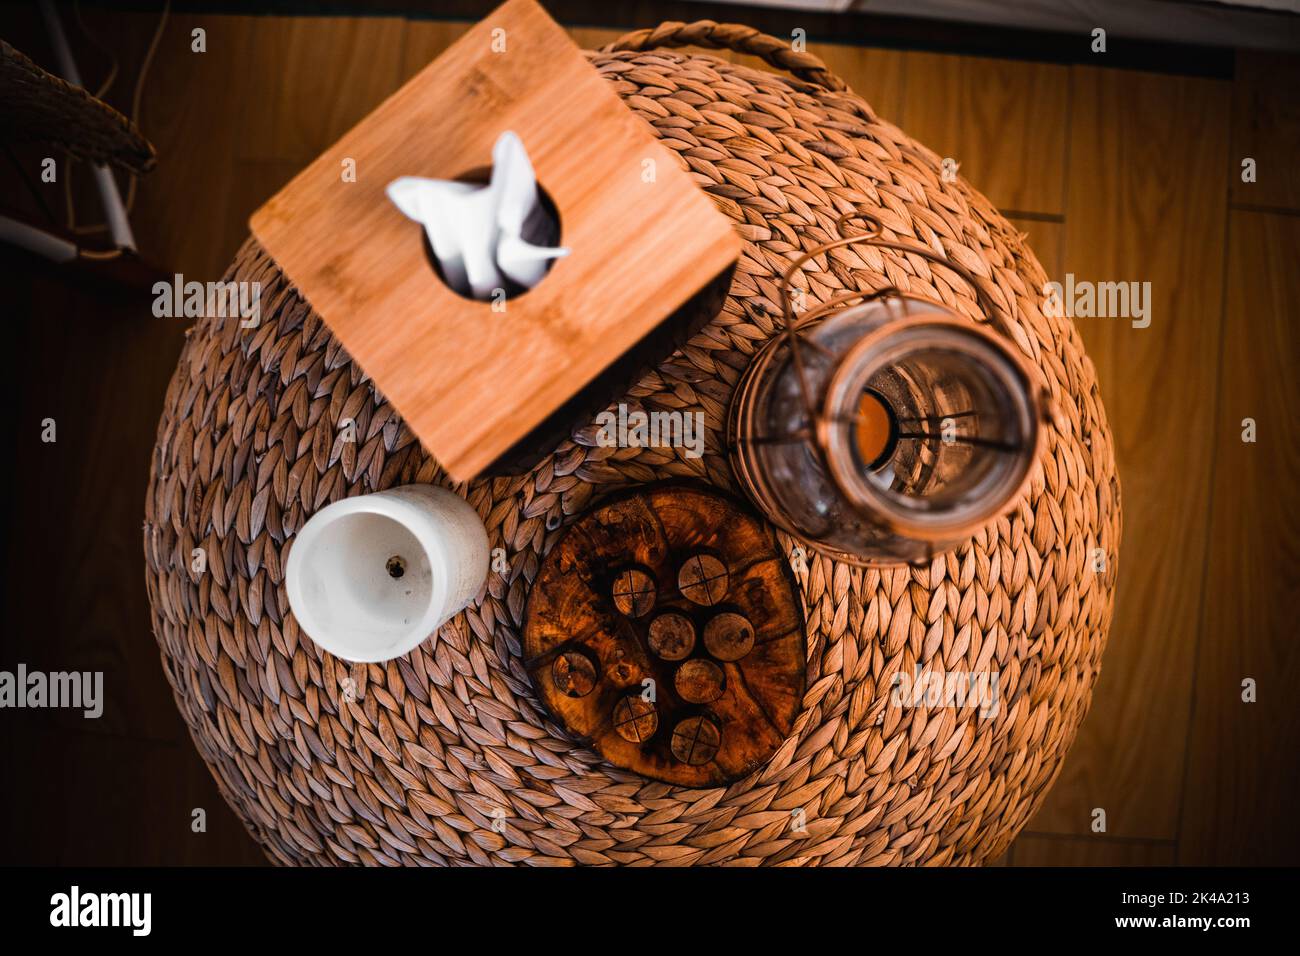 round wicker nightstand on a wooden floor with a tissue box a candle and a glass chandelier Stock Photo